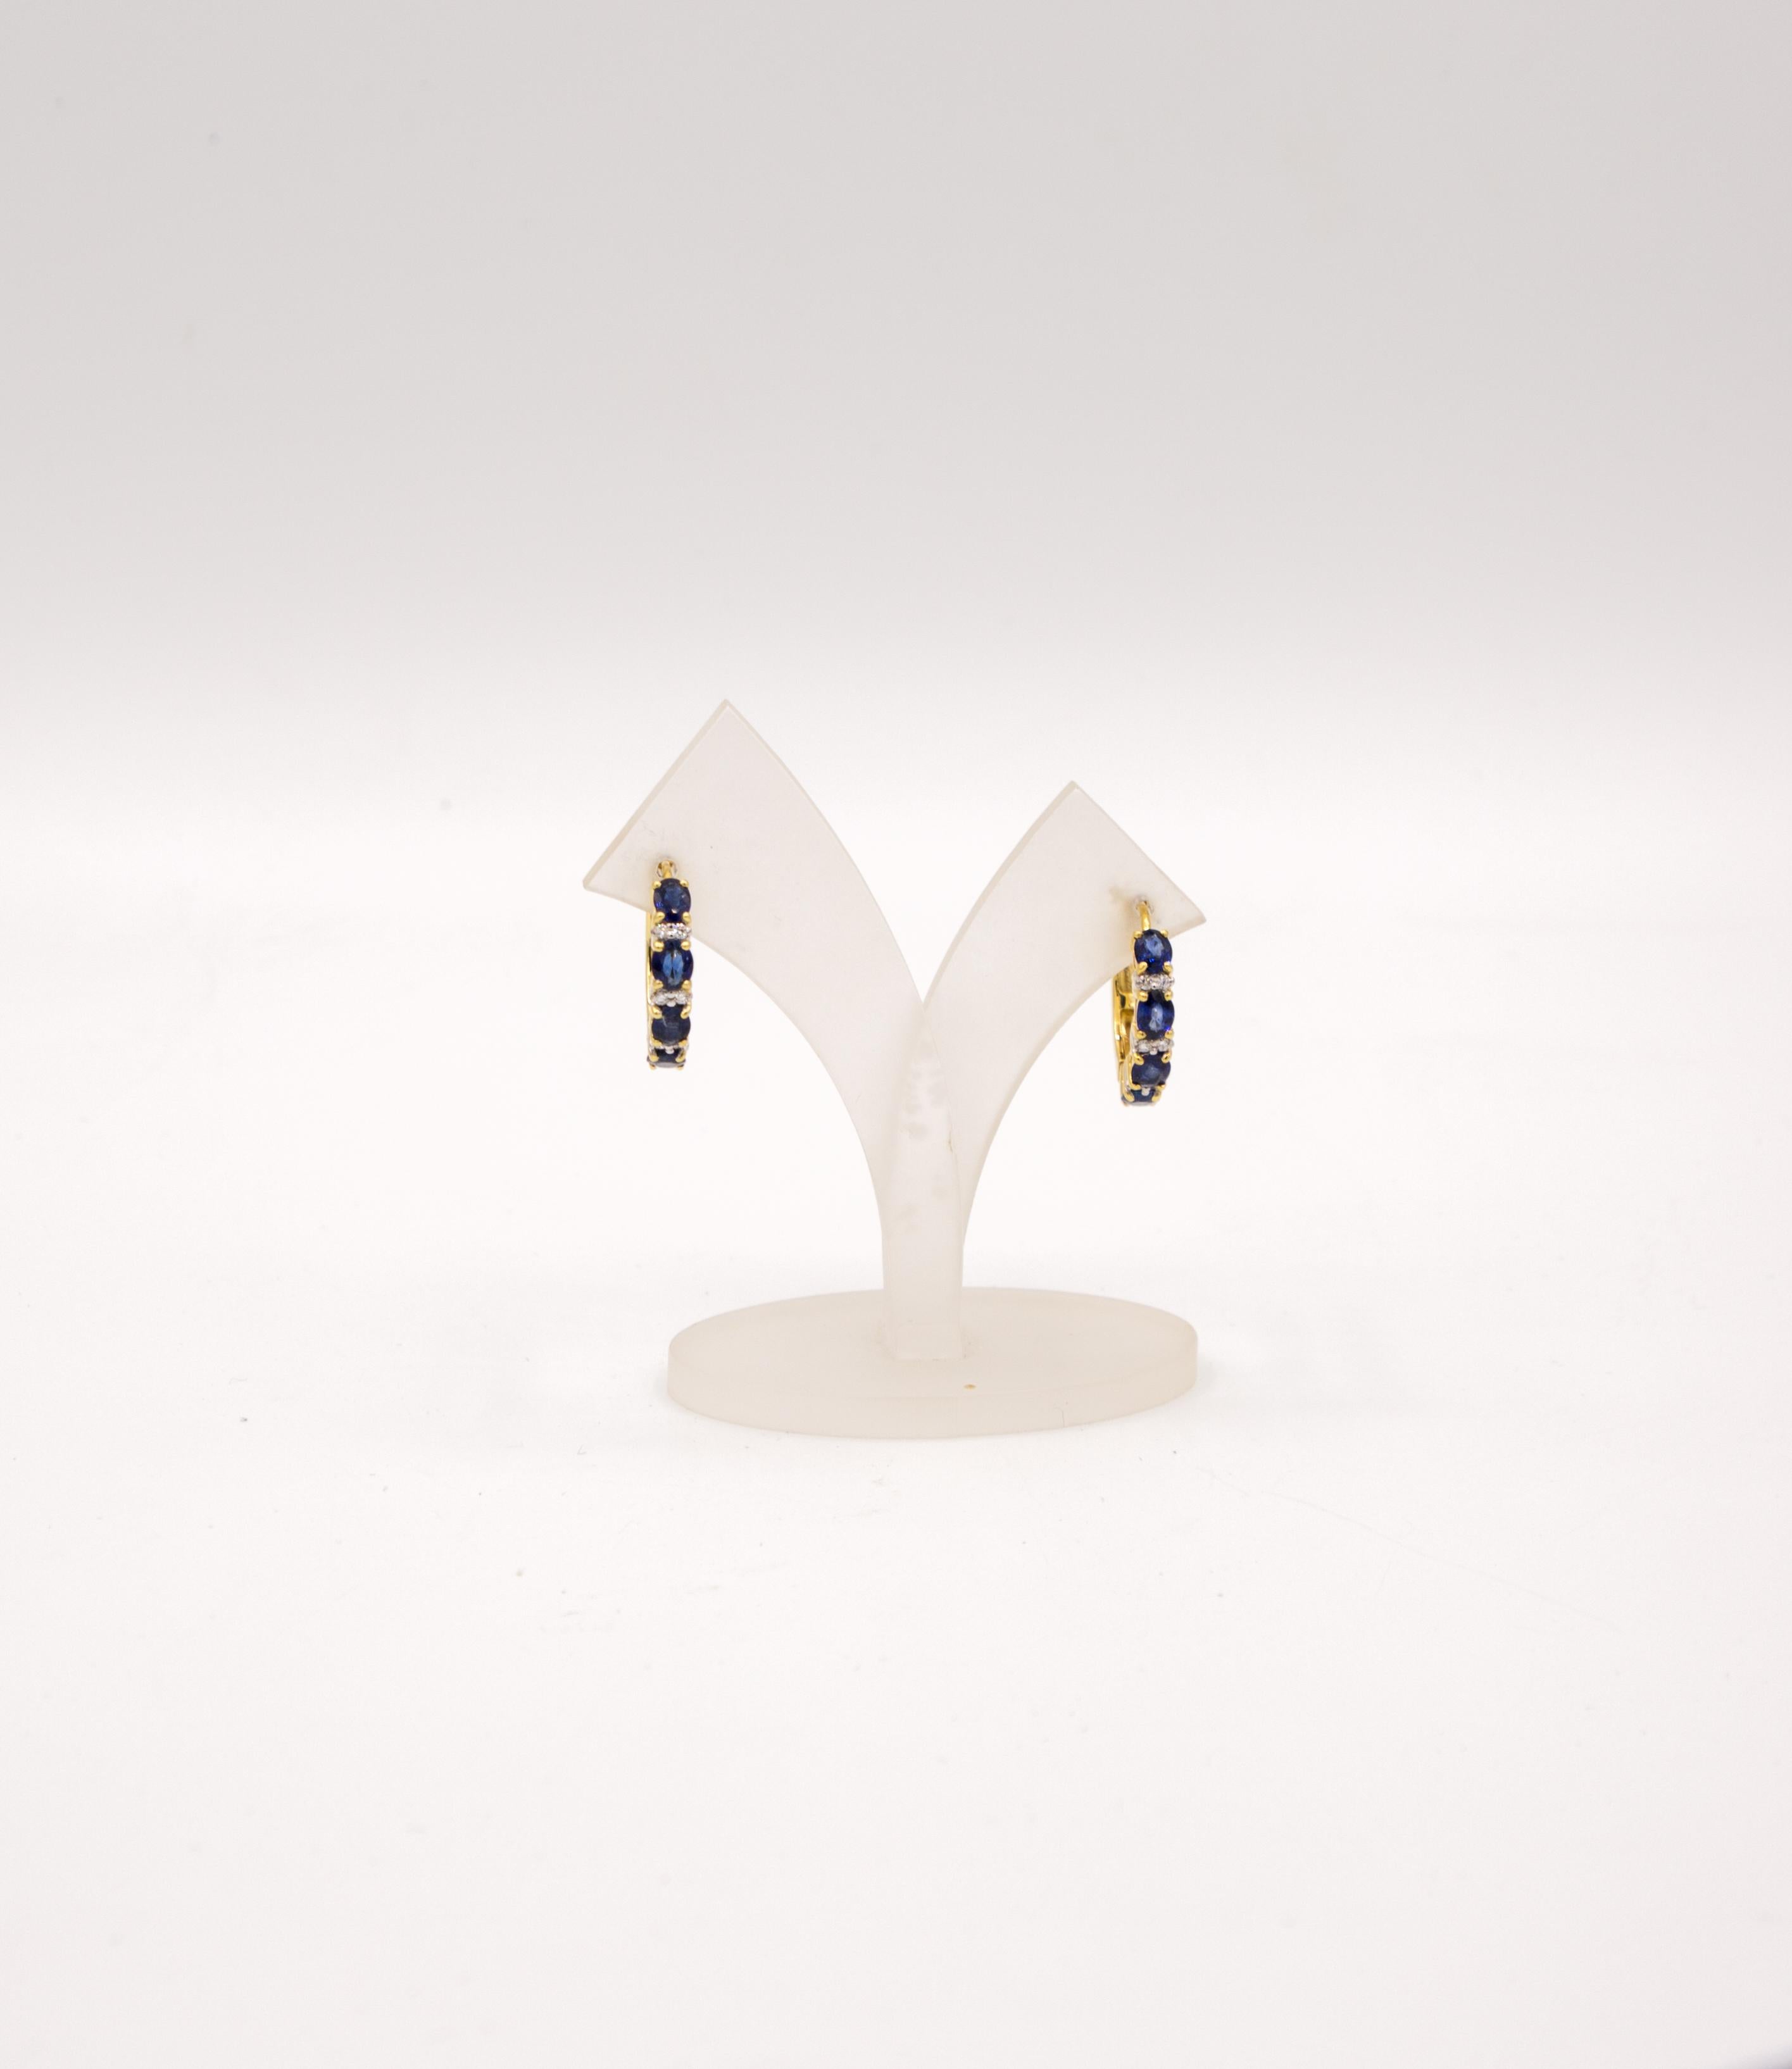 This hoop earrings has 2,66 ct sapphire
0,12 ct diamond all is setting in 18 k yellow gold
diameter is 20 mm 
weight is 7,73 gram

it is a earring for everyday 